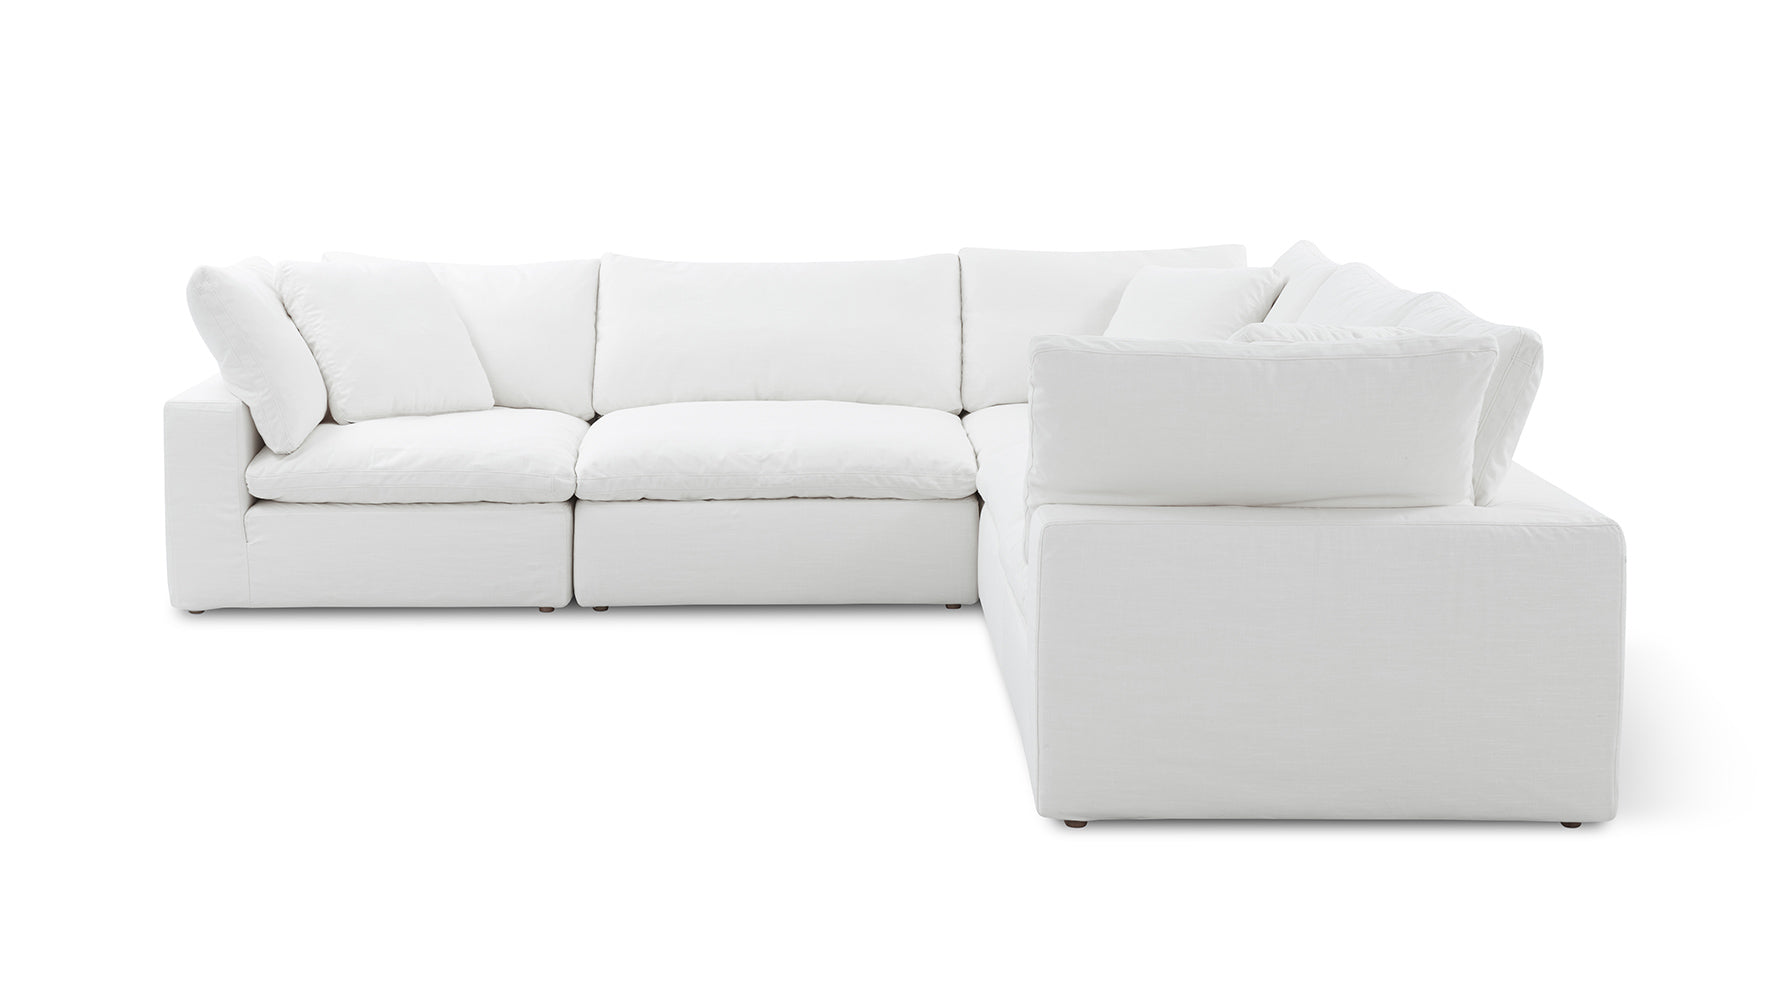 Movie Night™ 5-Piece Modular Sectional Closed, Standard, Brie - Image 1